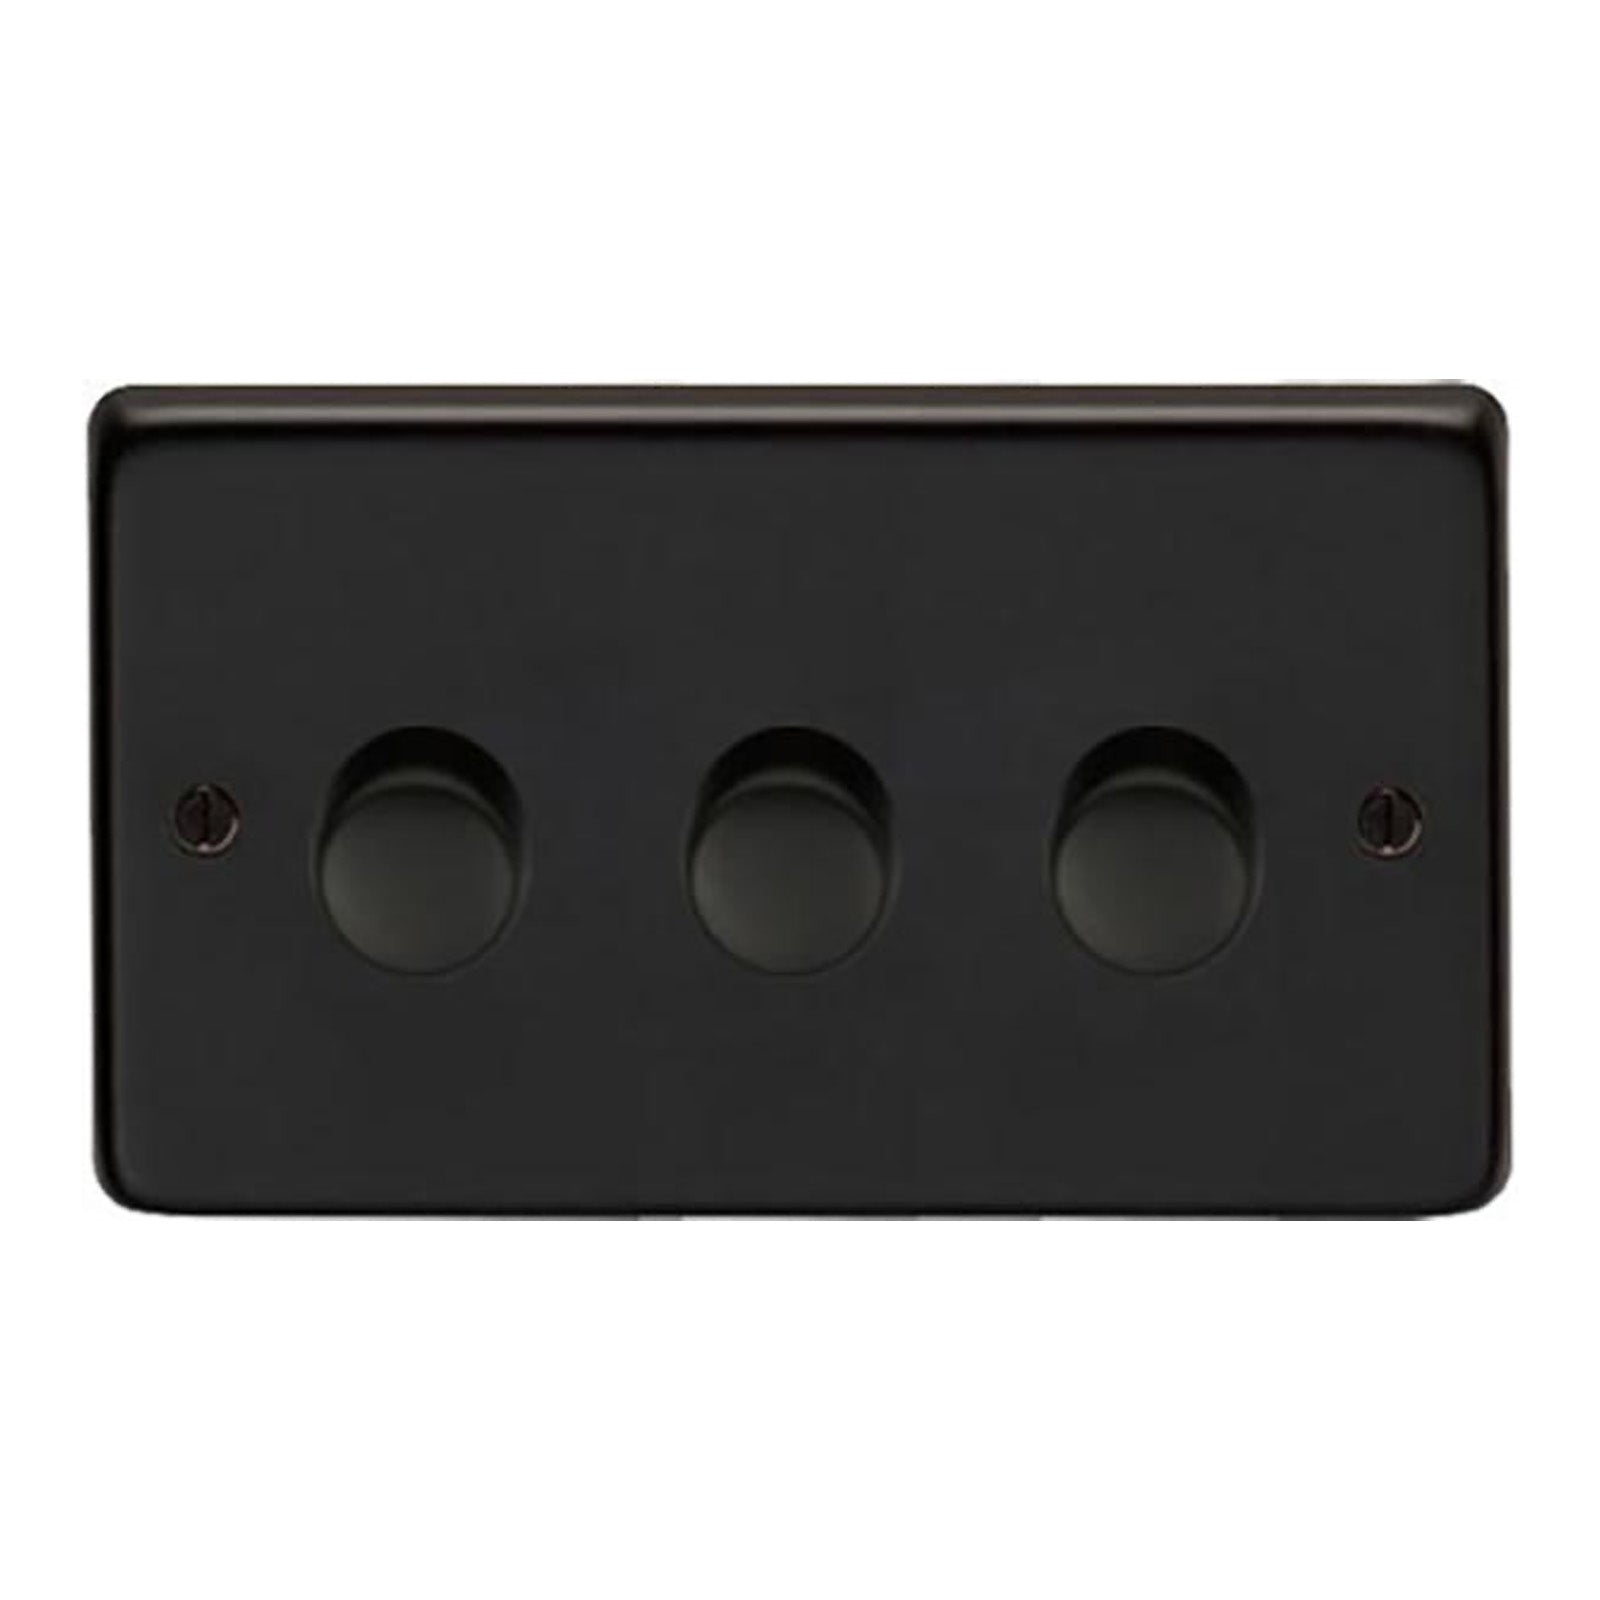 SHOW Image of Triple LED Dimmer Switch with Matt Black finish